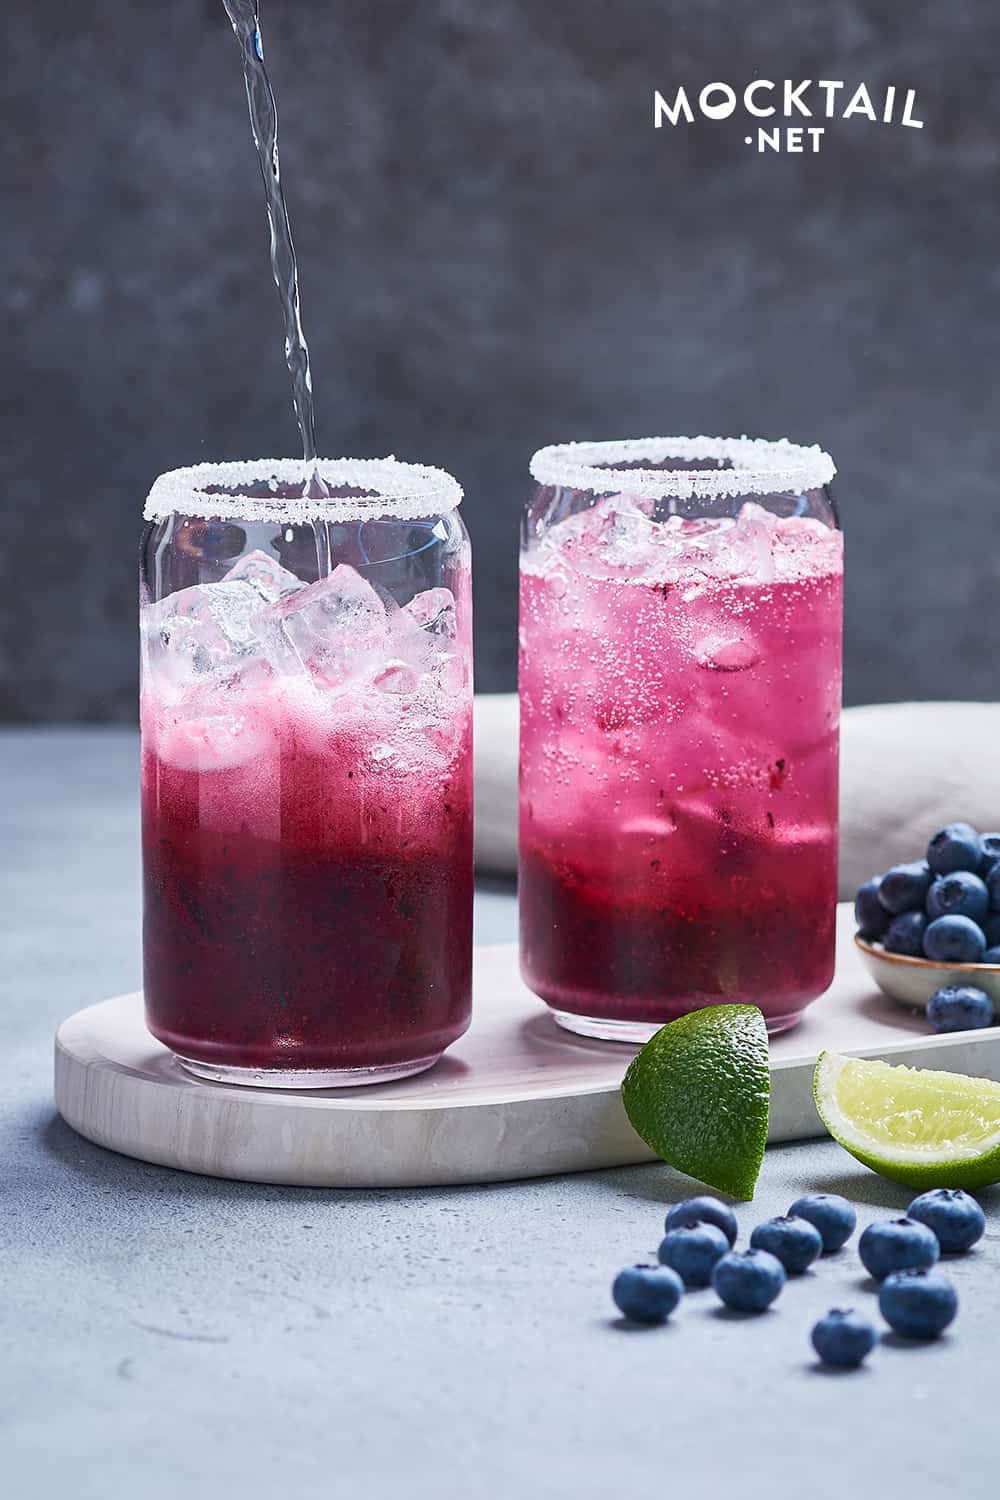 Ingredients in a Blueberry Mojito Mocktail